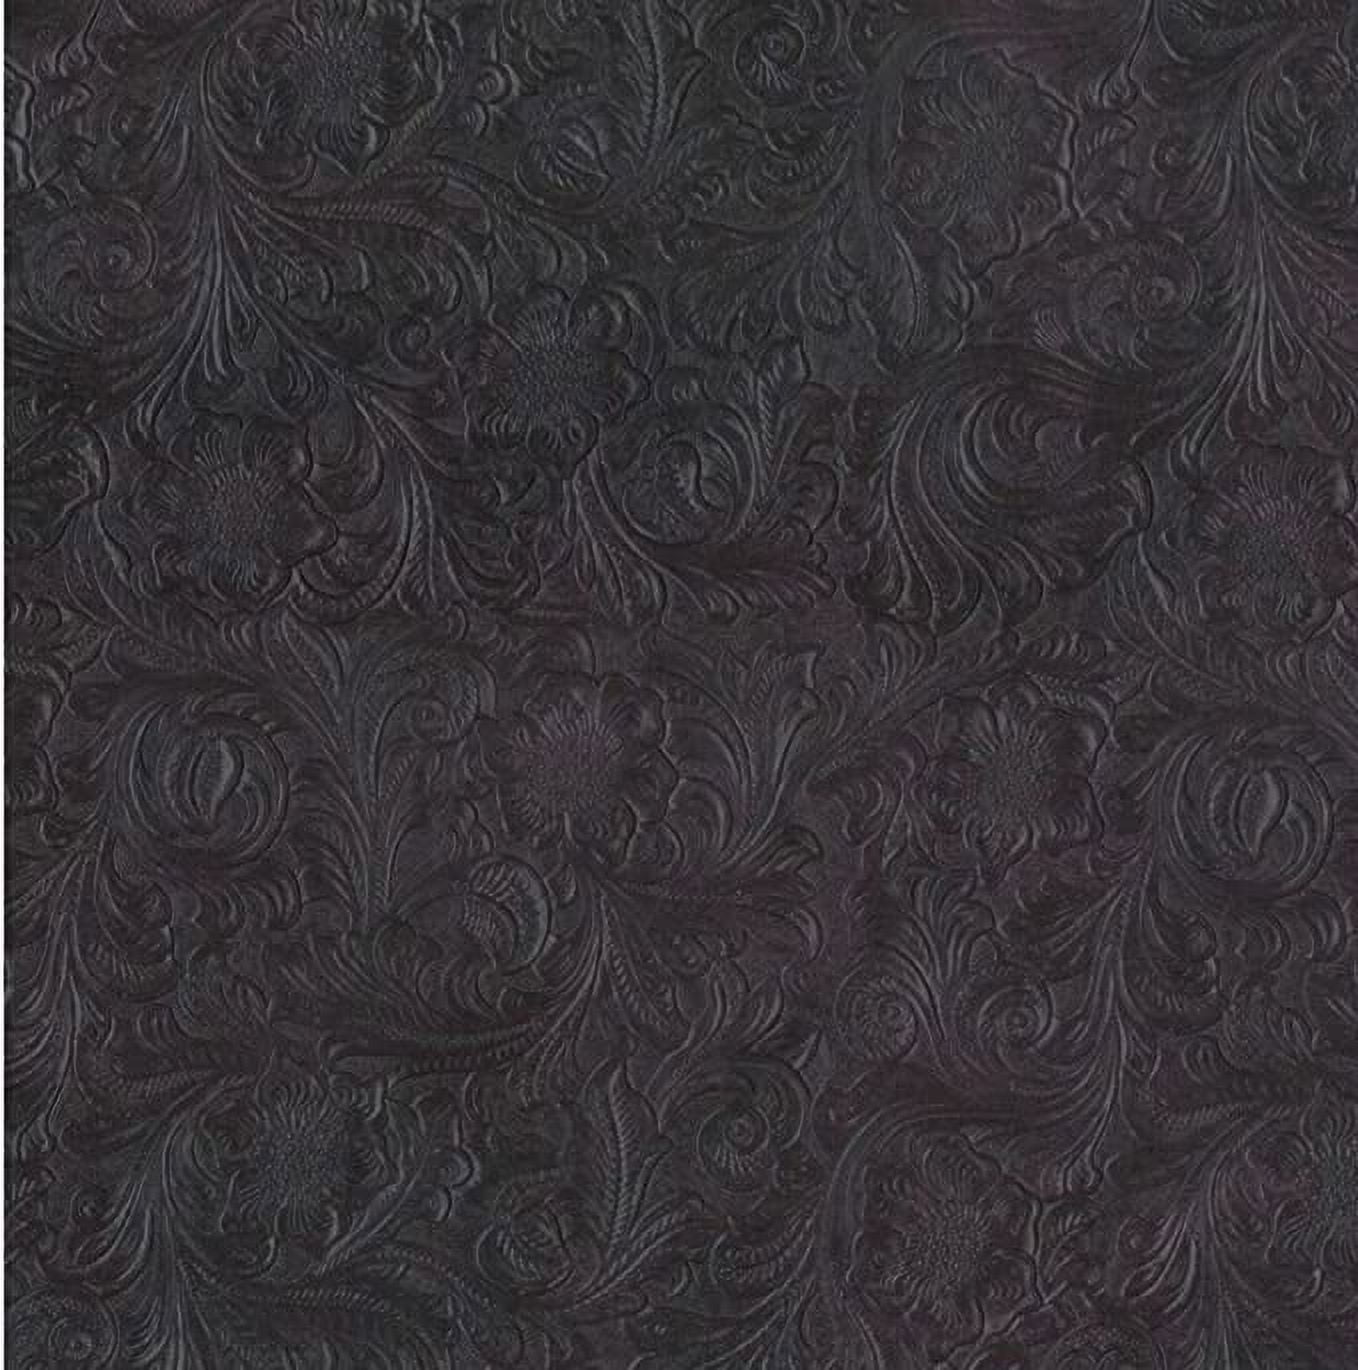 Black Vintage Western Floral Pu Leather Fabric / Sold By The Yard/DuroLast  ® Wholesale Black Vintage Western Floral Pu Leather Fabric DuroLast ® :  Online Fabric Store by the yard